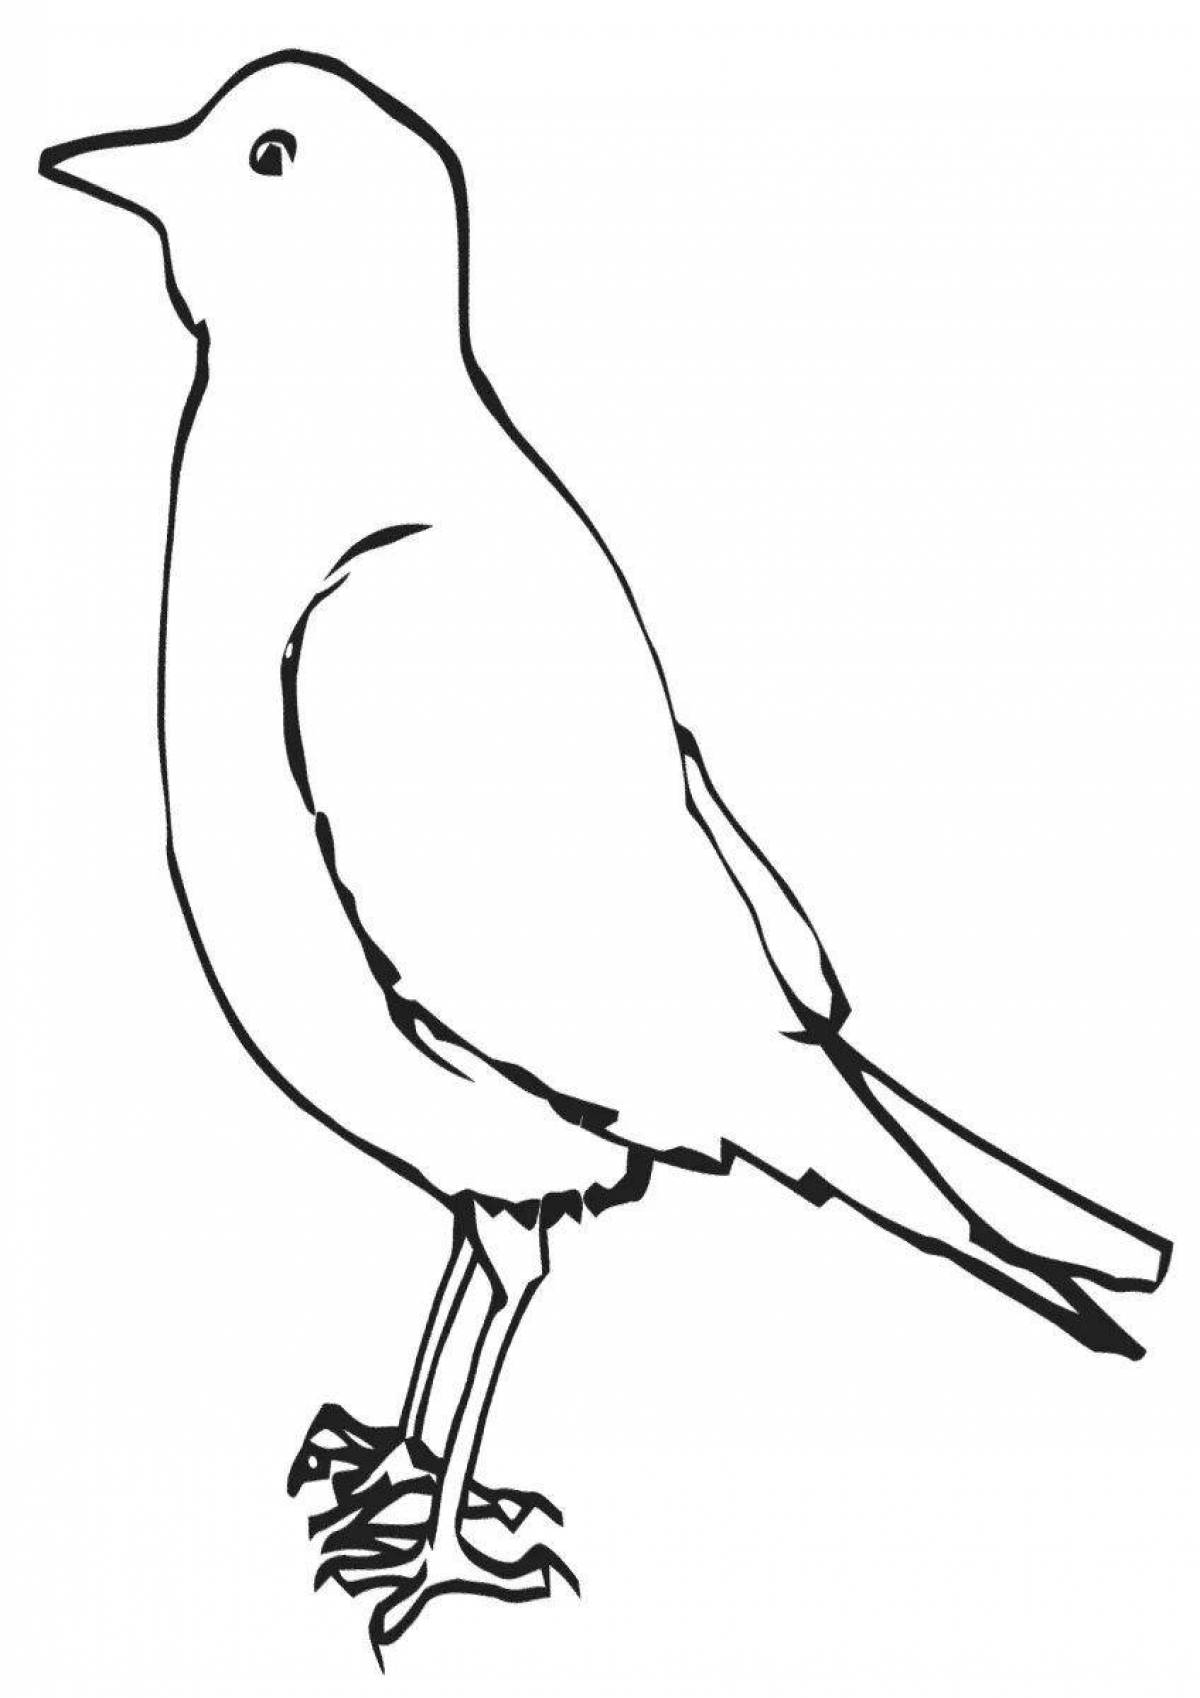 Awesome jackdaw coloring page